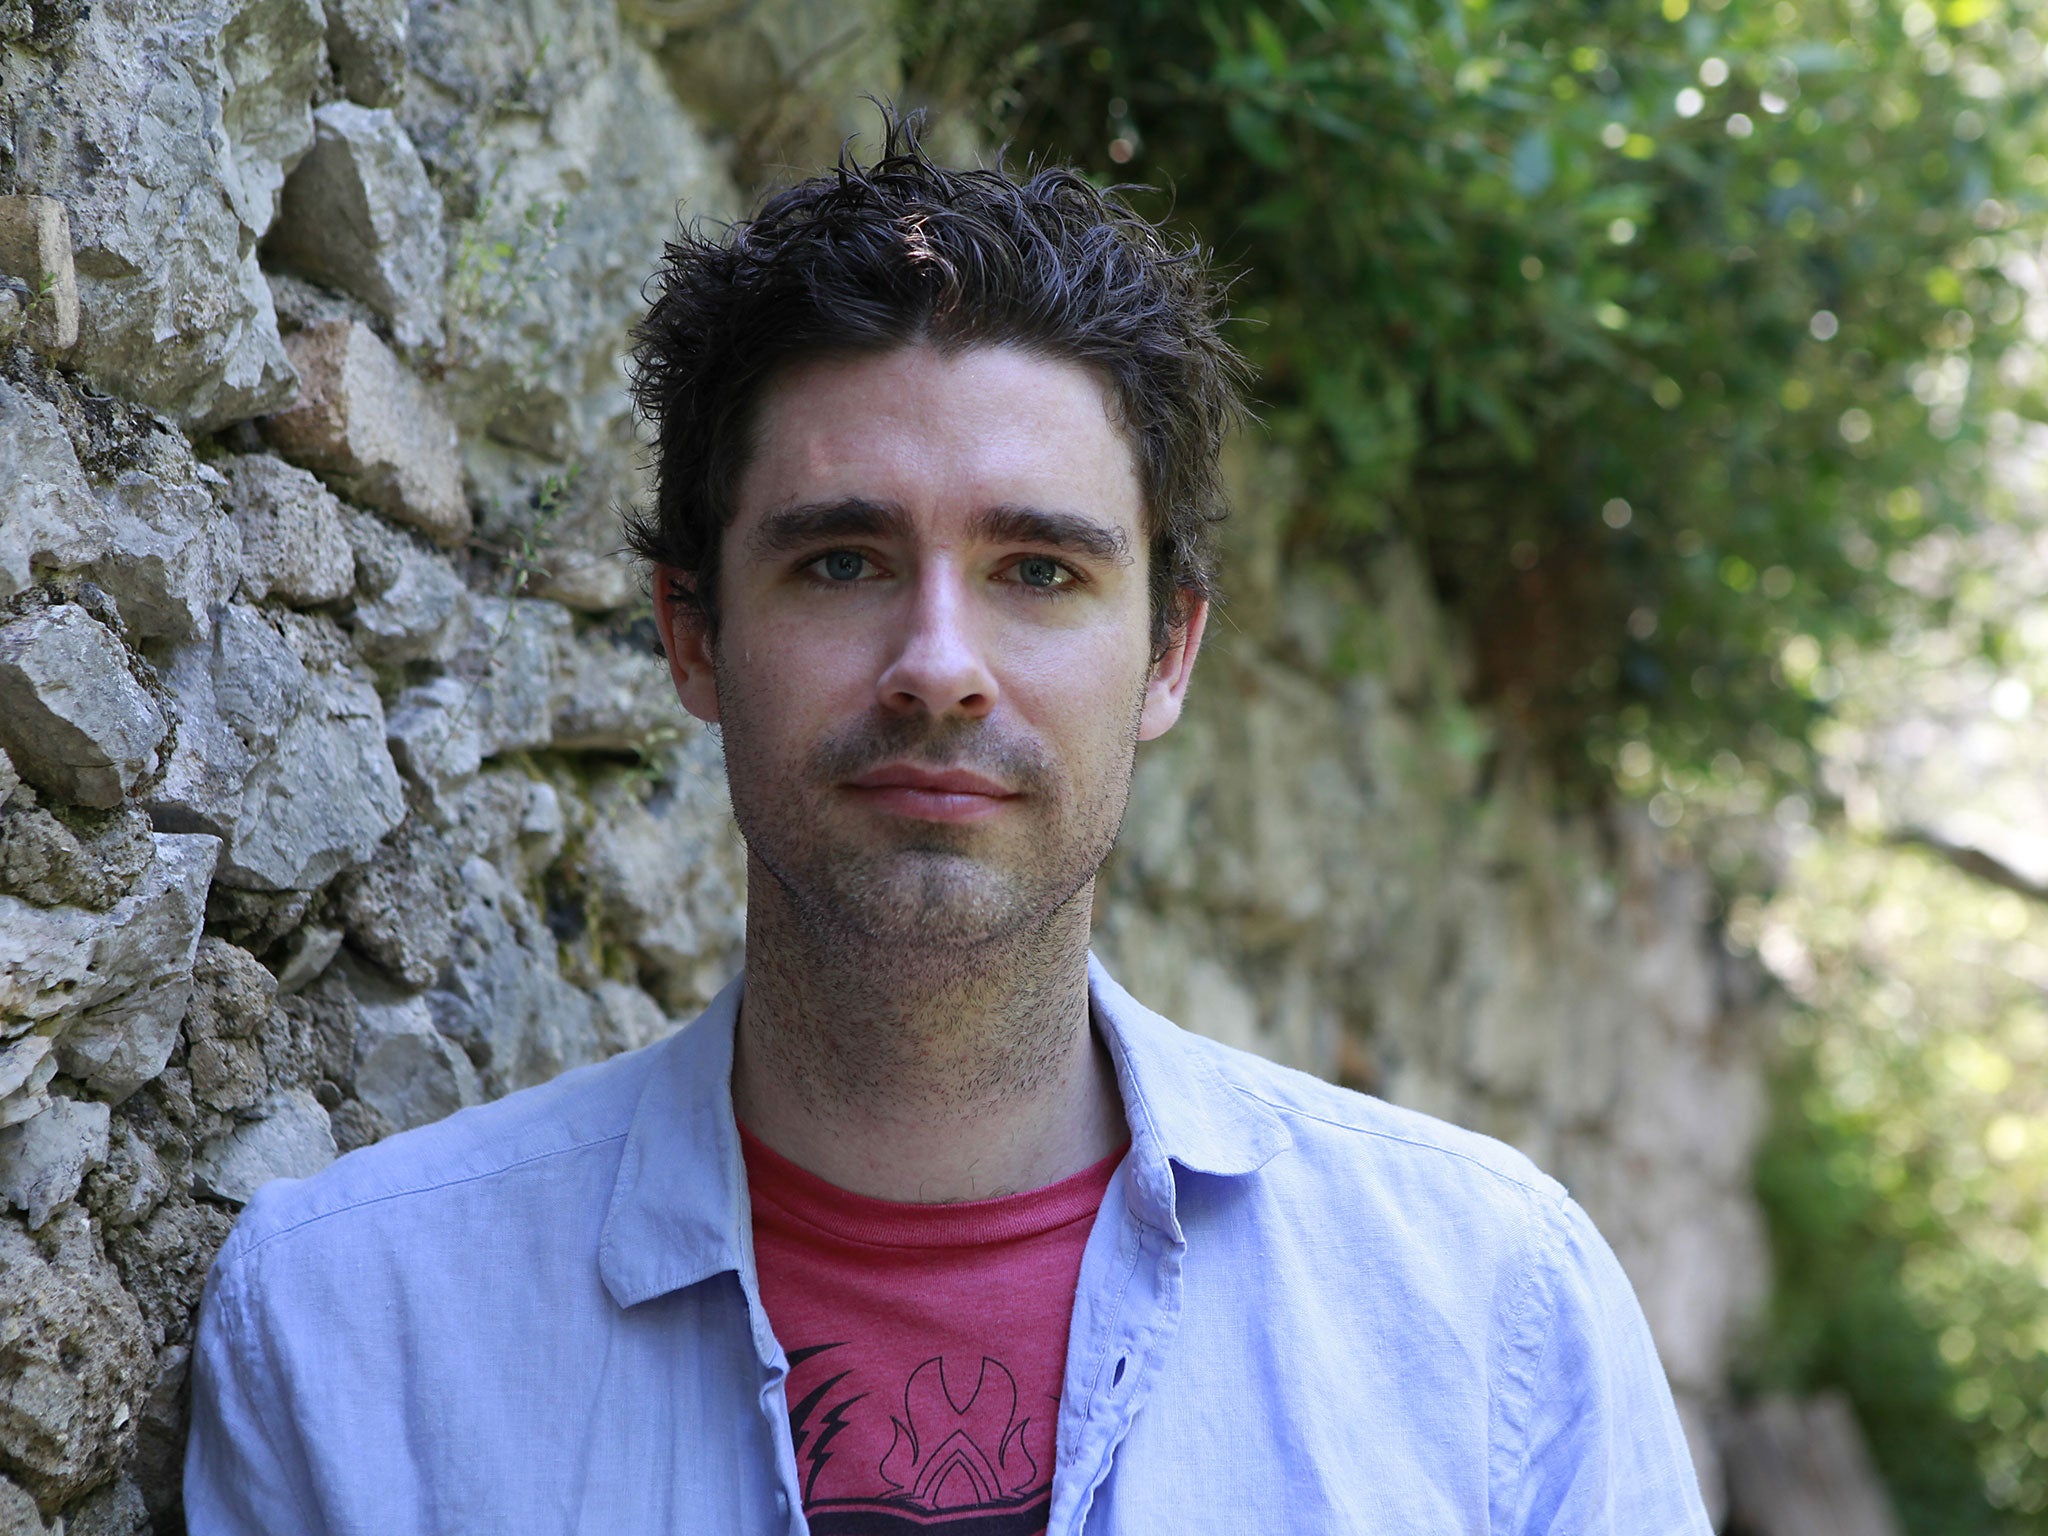 US author Joshua Ferris has made the first global Man Booker Prize longlist